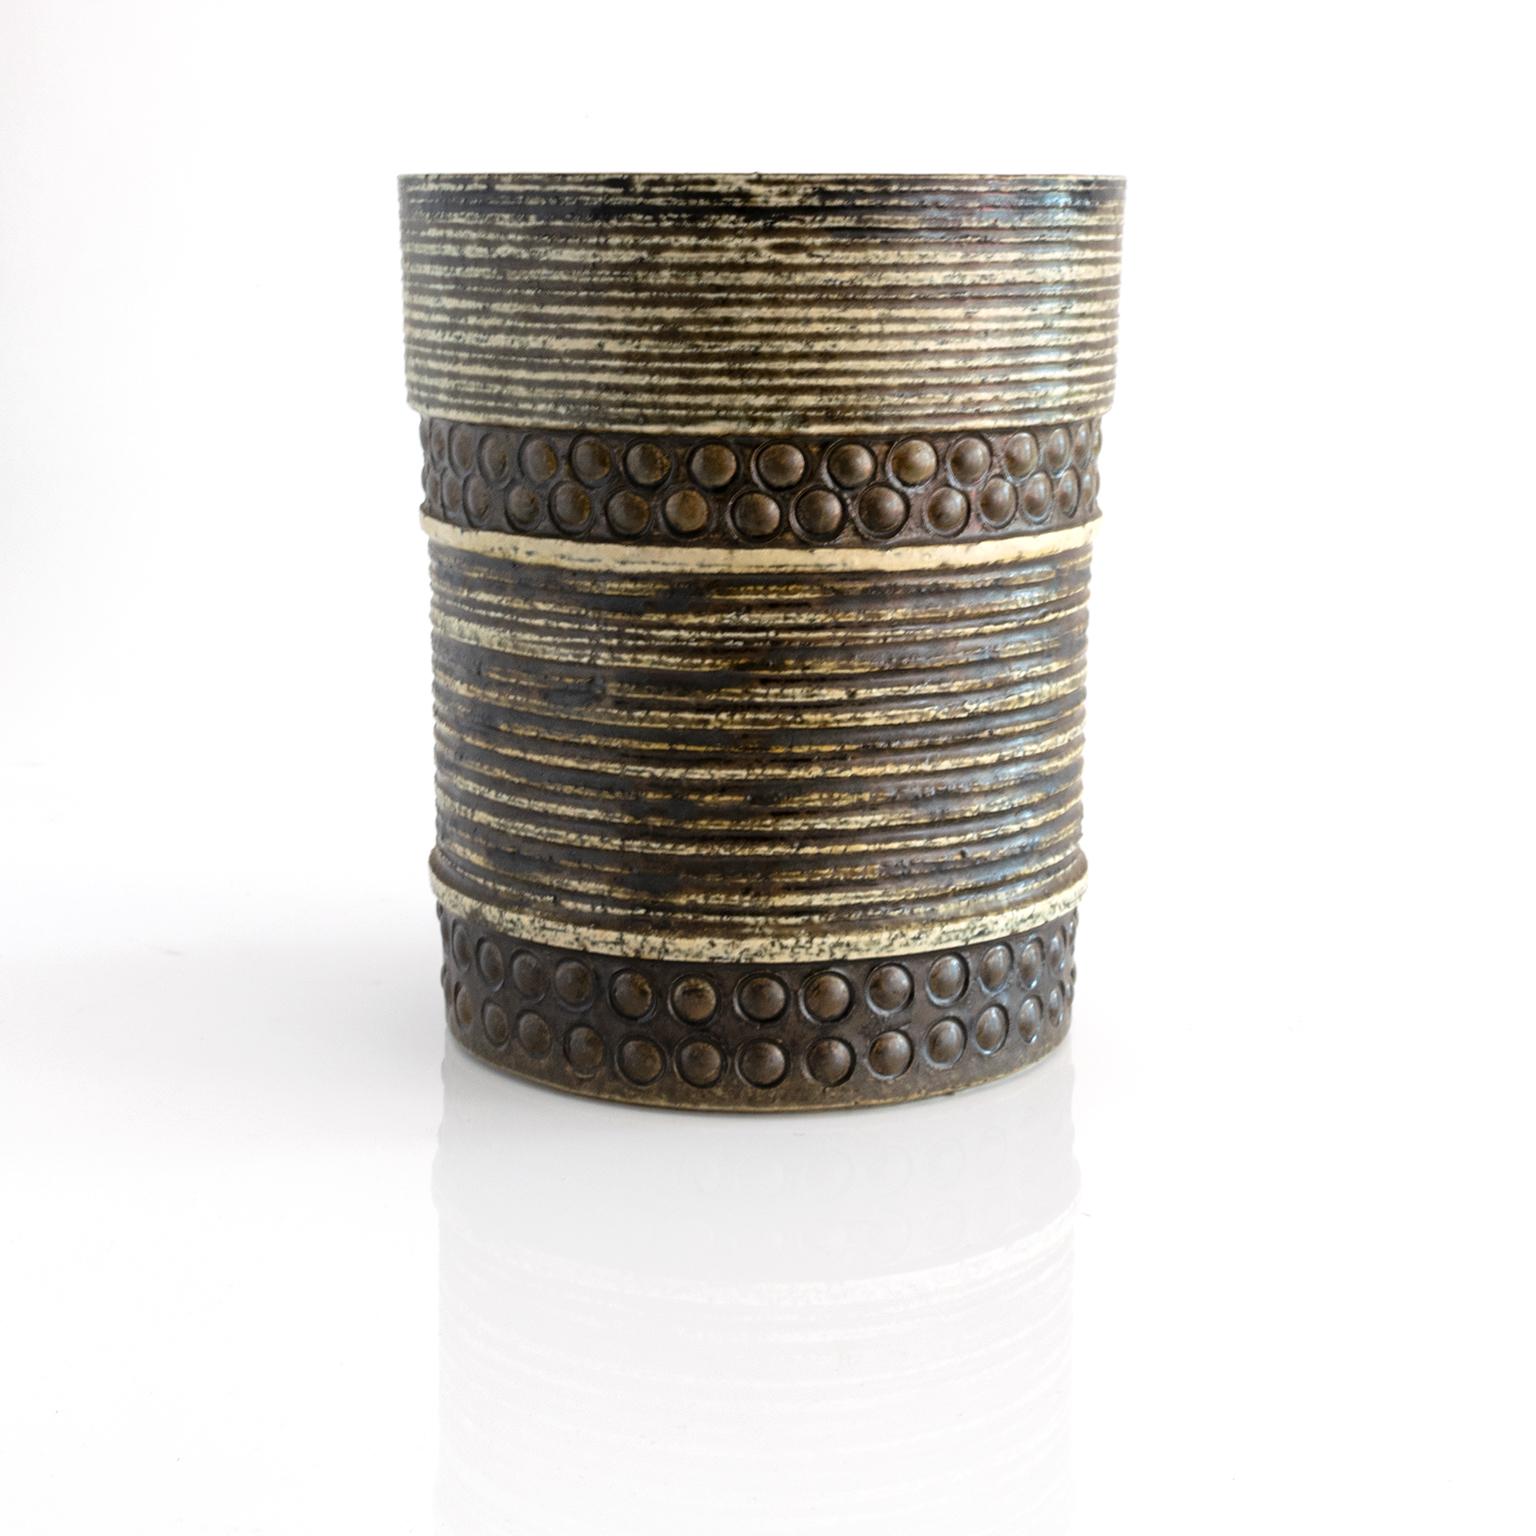 A large cylinder shaped vase by Britt-Louise Sundell for Gustavsberg, circa 1960. The vase has a highly textured surface (chamotte clay) with impressed circles and horizontal lines.

Measures: Height 9.5